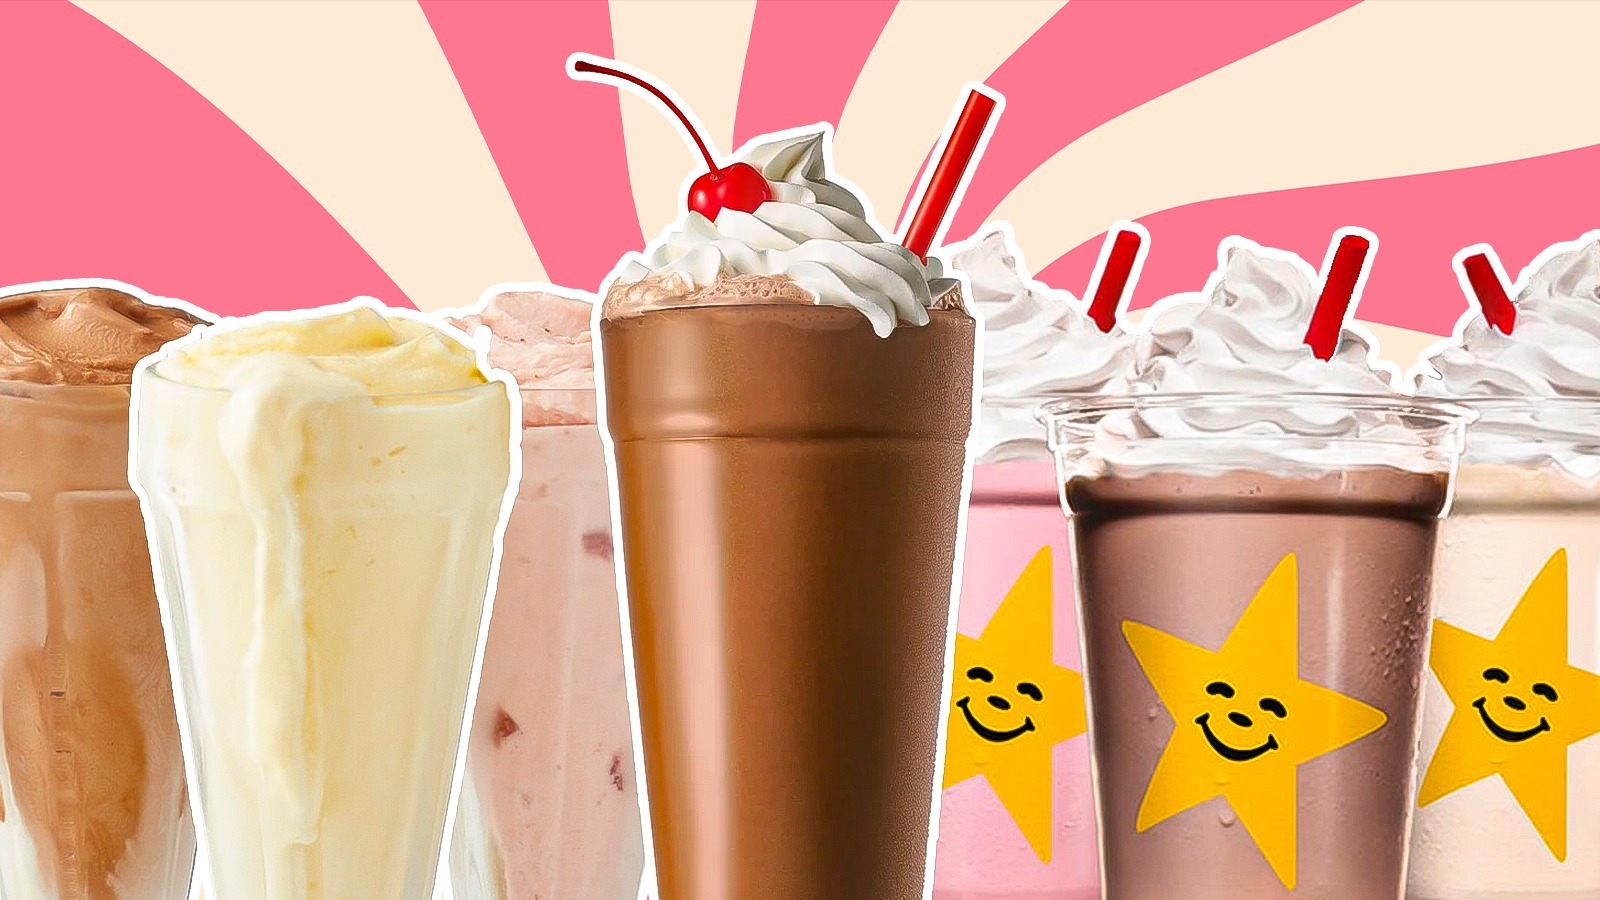 7 Fast Food Chains That Use Real Ice Cream For Their Milkshakes